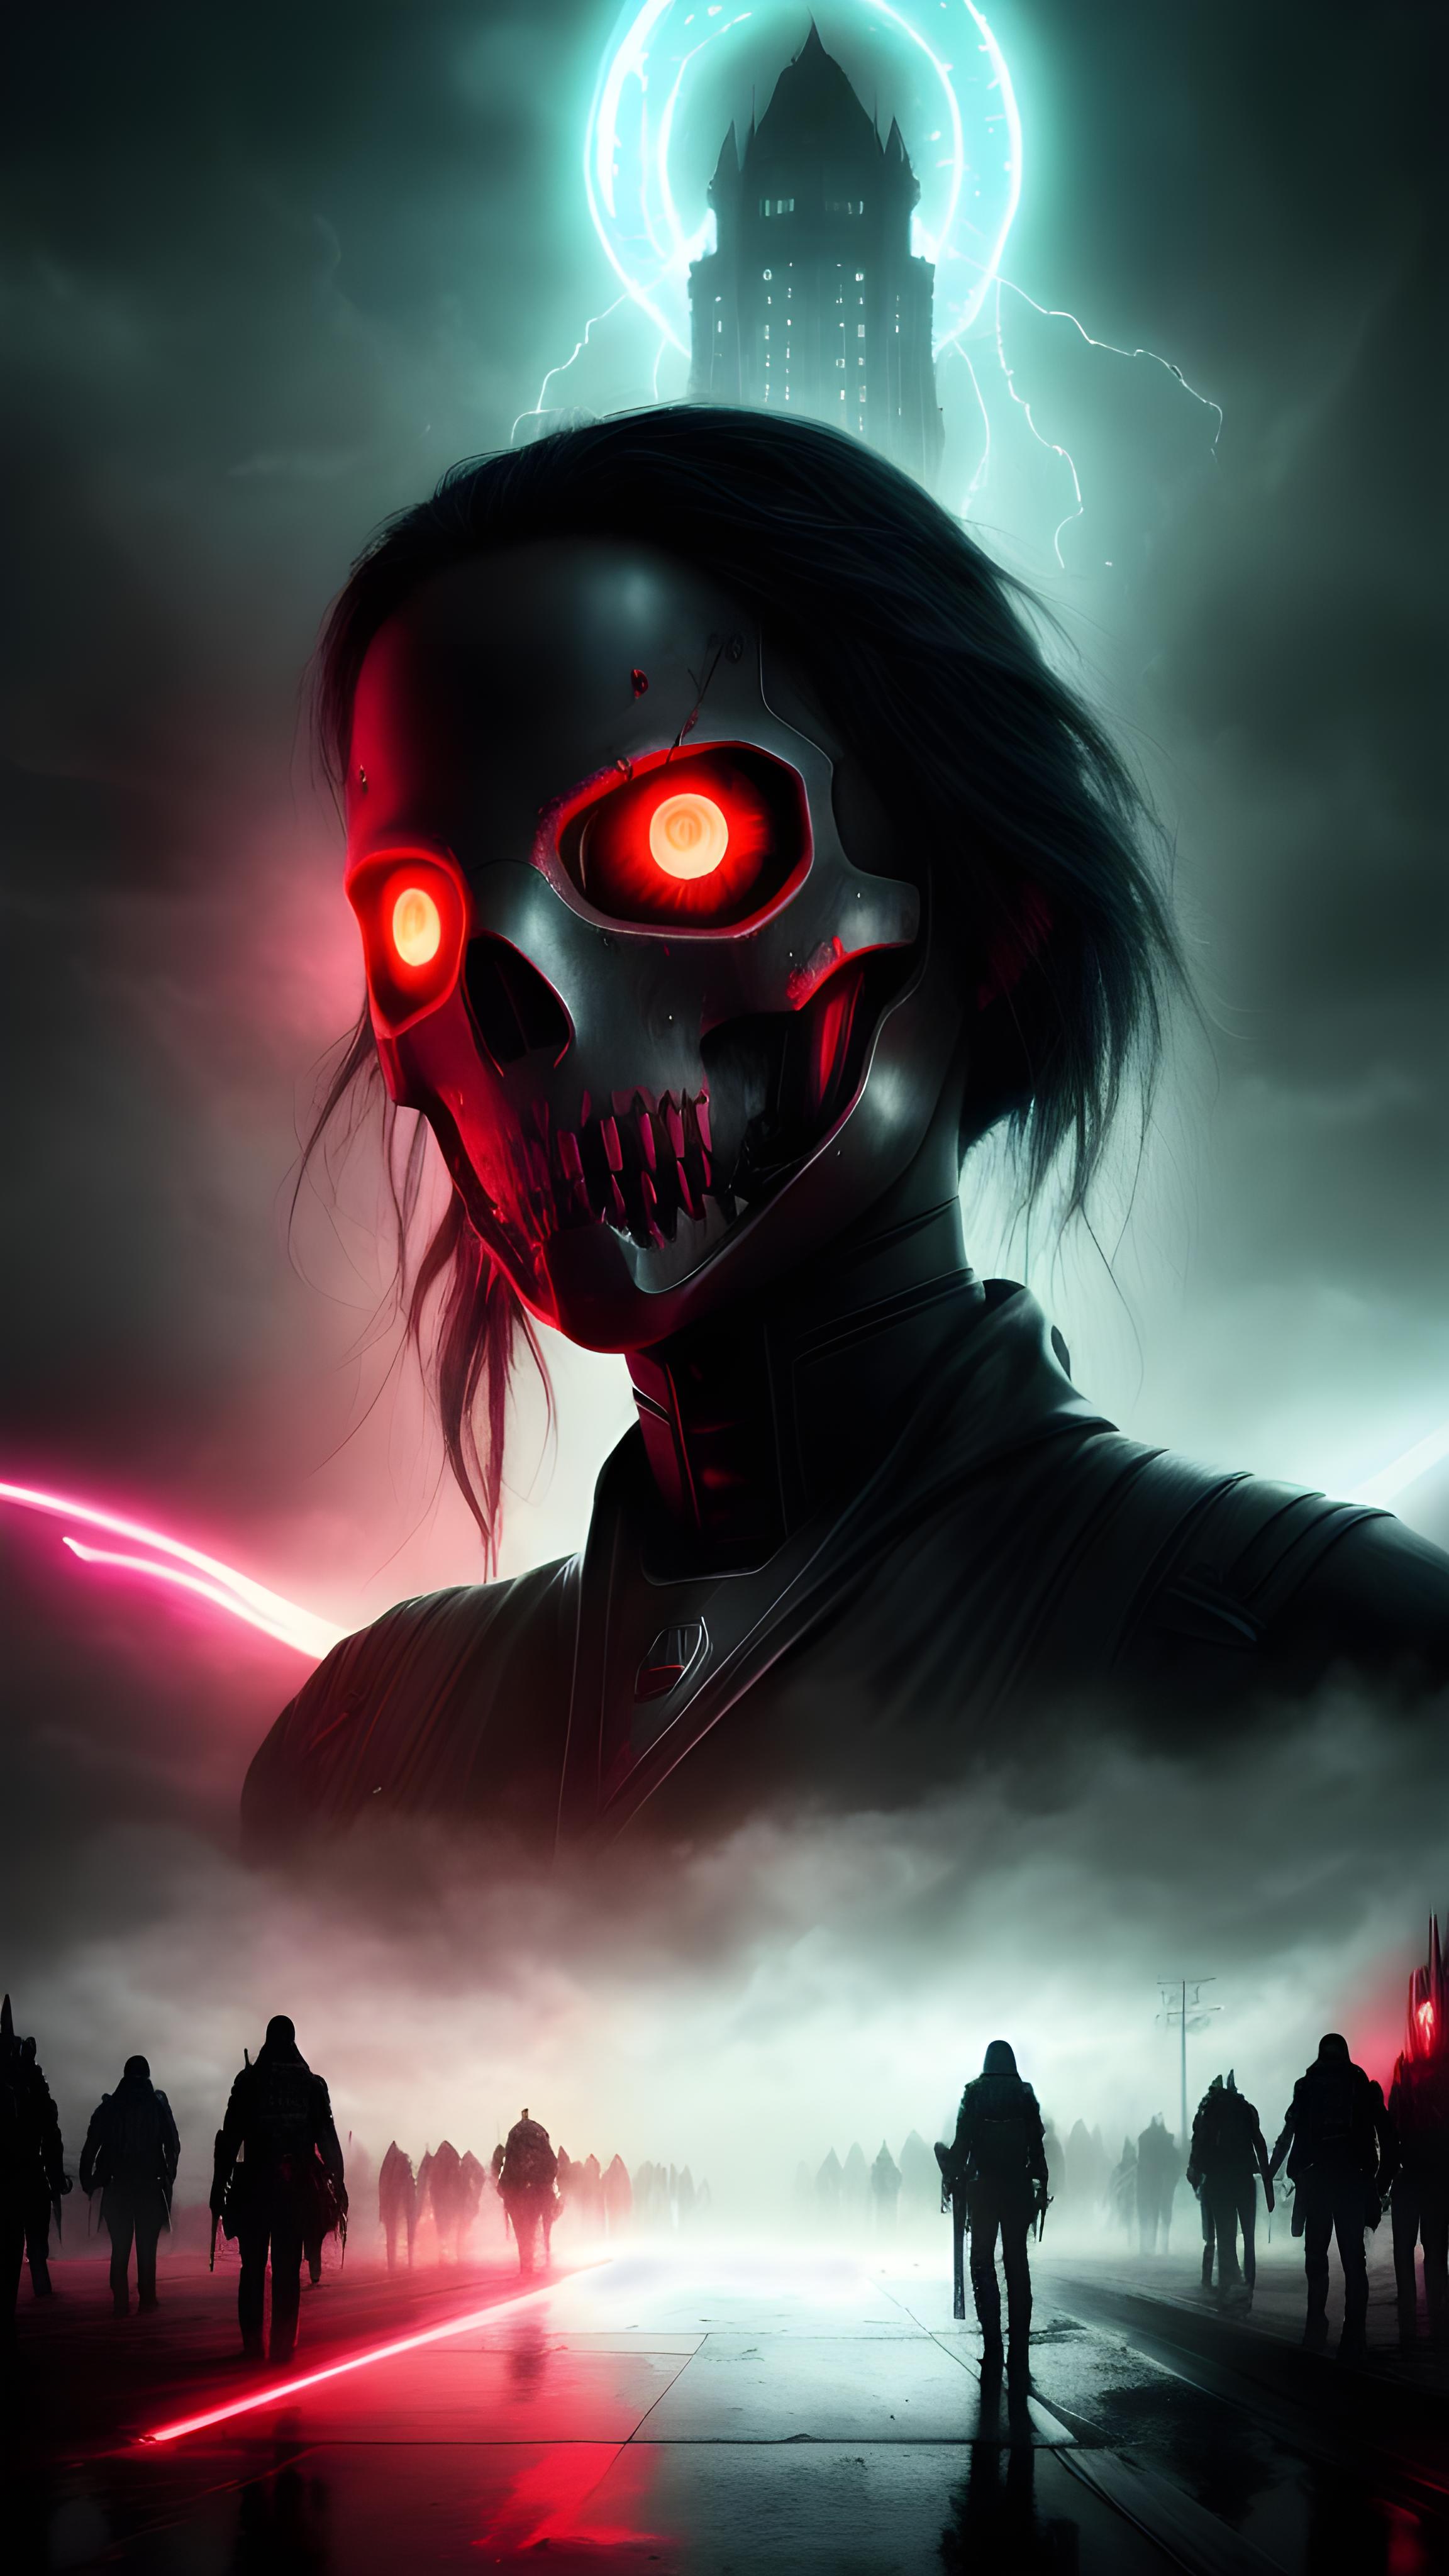 A dark and moody illustration of a woman with glowing red eyes, wearing a black and red costume, and holding two red lightsabers.